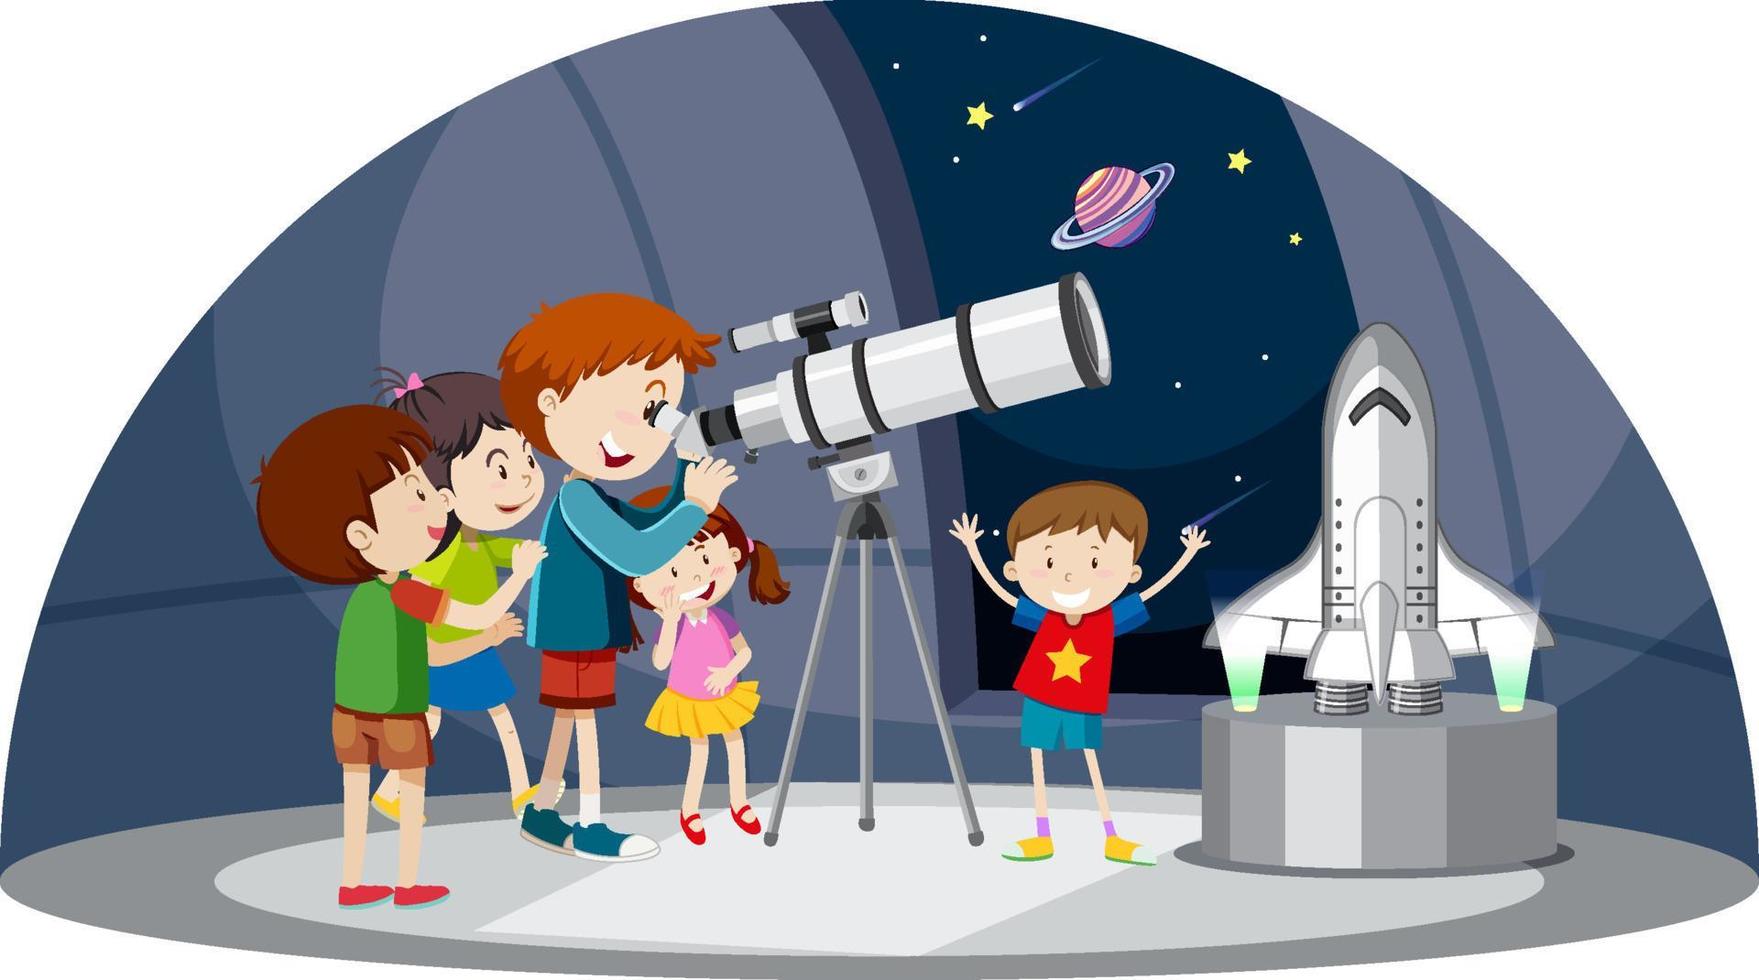 Astronomy theme with kids looking at telescope vector